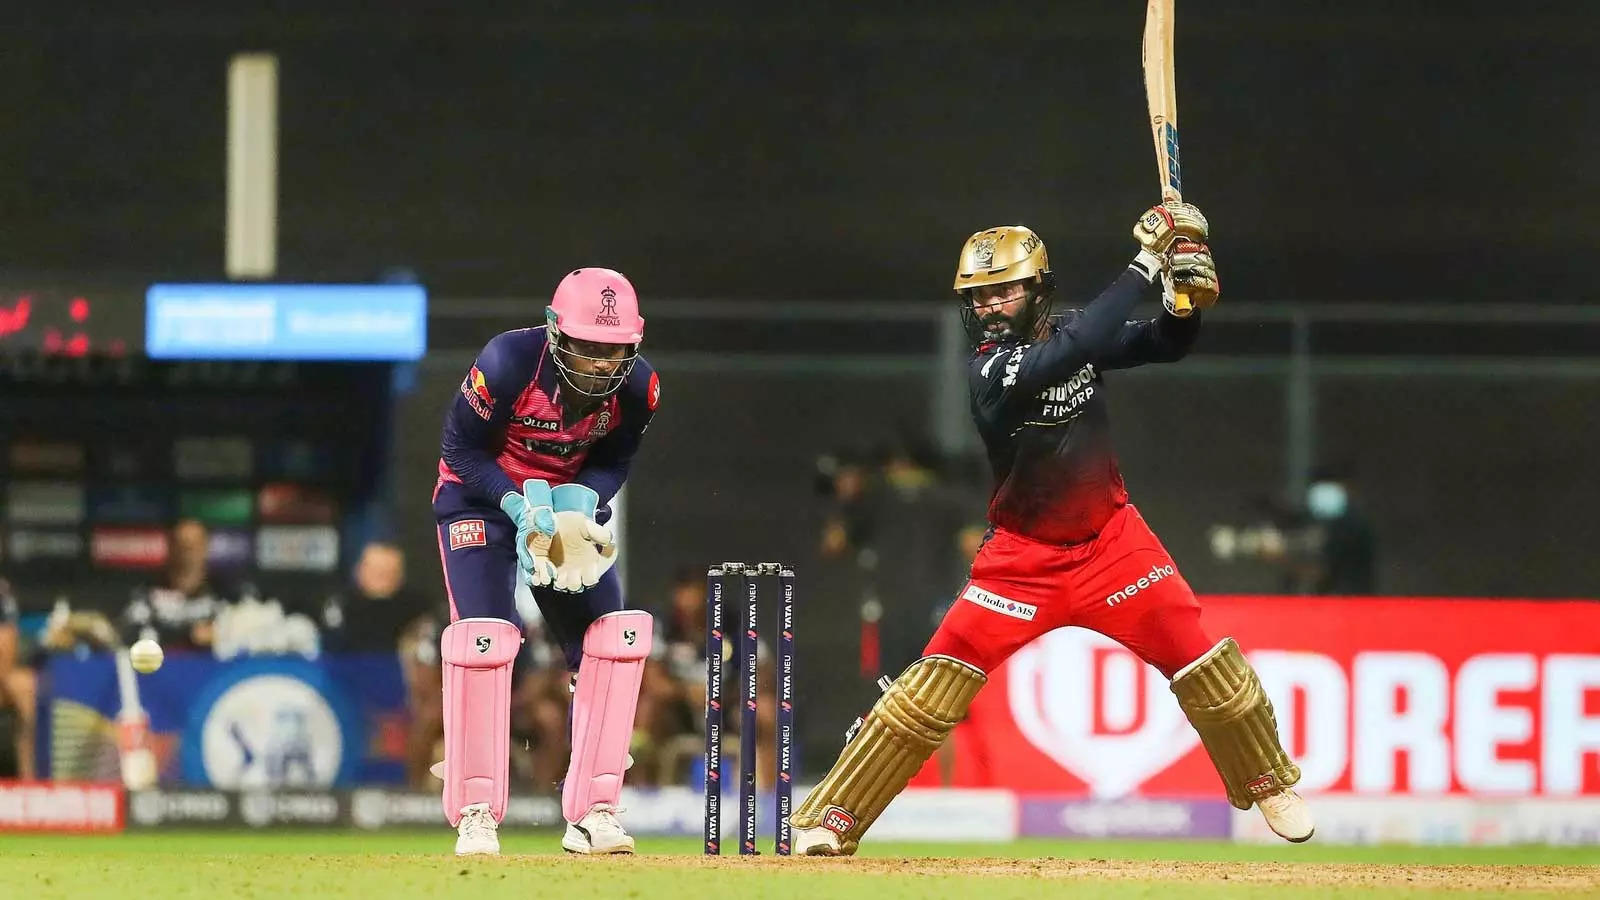 Dinesh Karthik was RCB's hero in the last match-up with RR